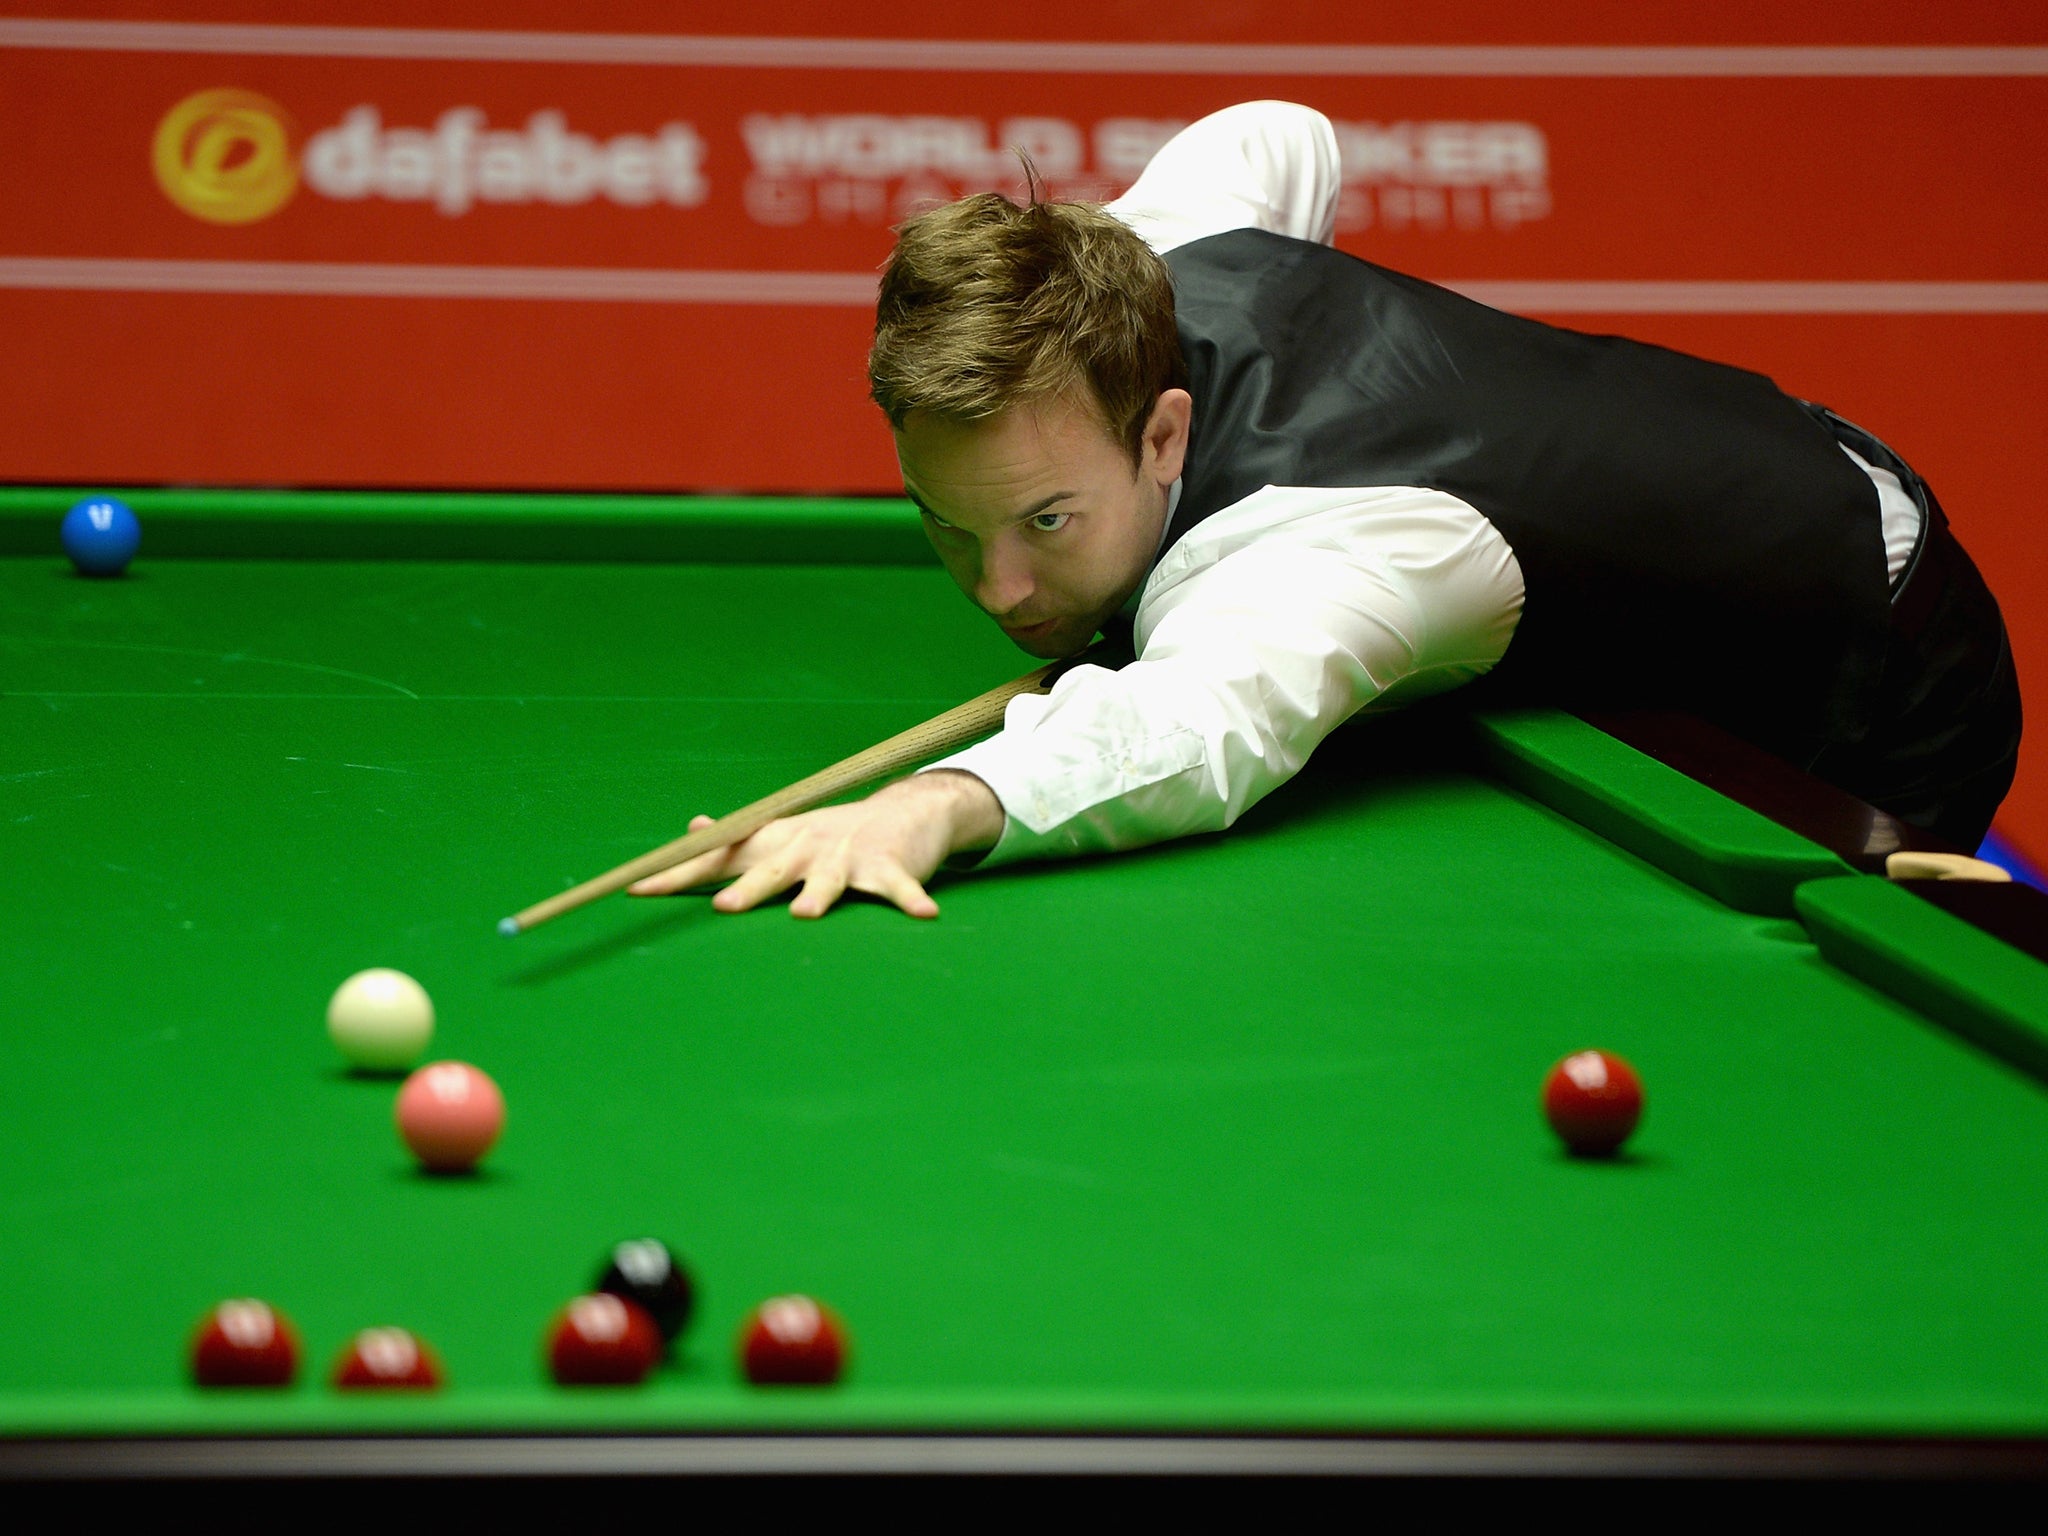 Ali Carter in action against Mark Selby during the second round of The Dafabet World Snooker Championship at Crucible Theatre on April 25, 2014 